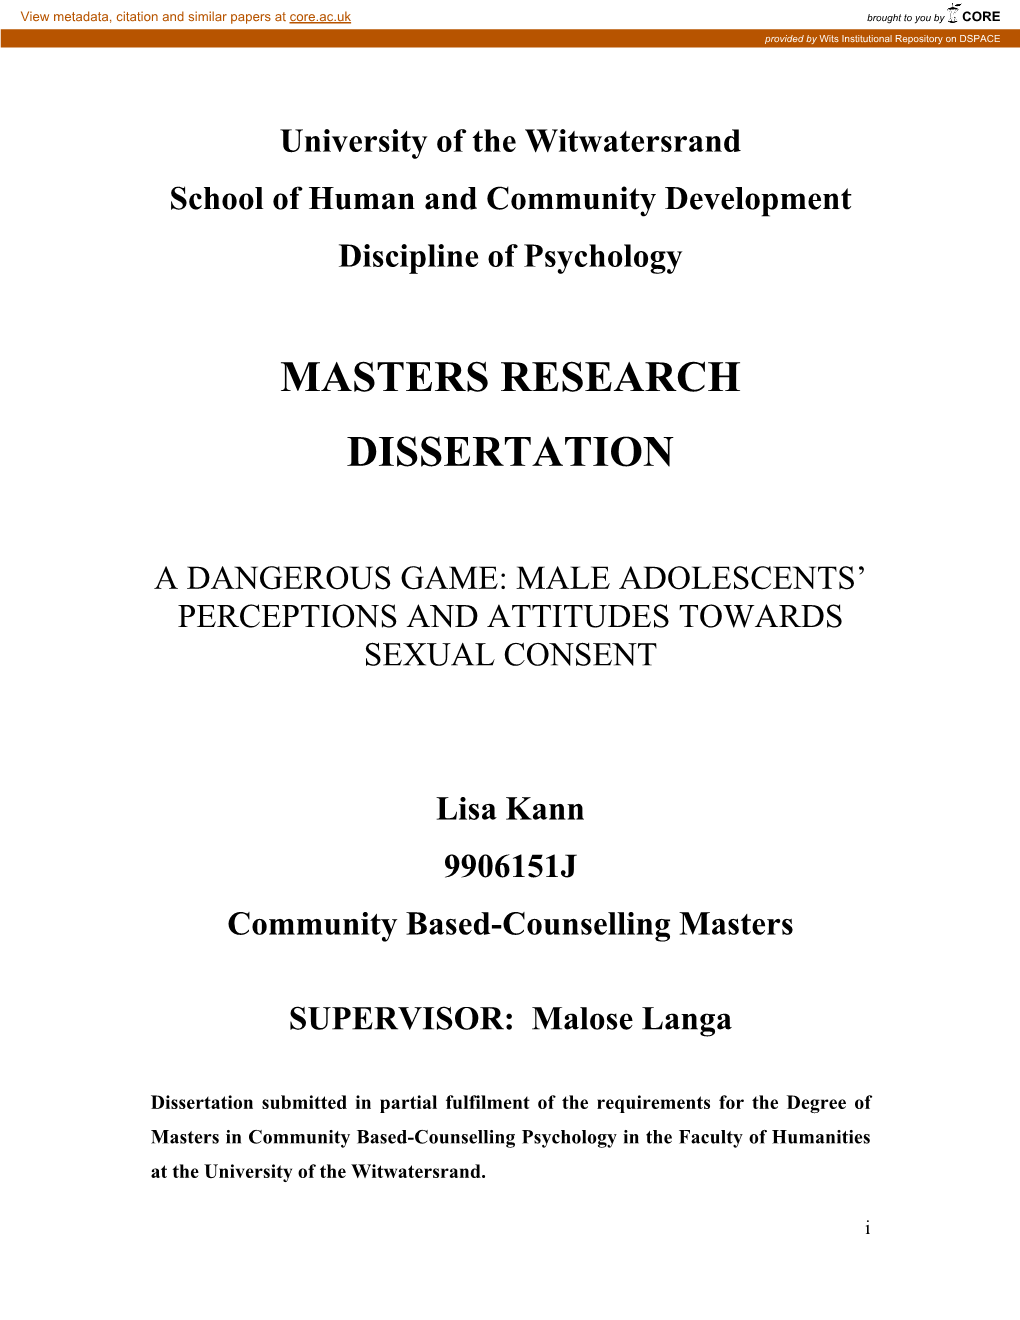 Masters Research Dissertation